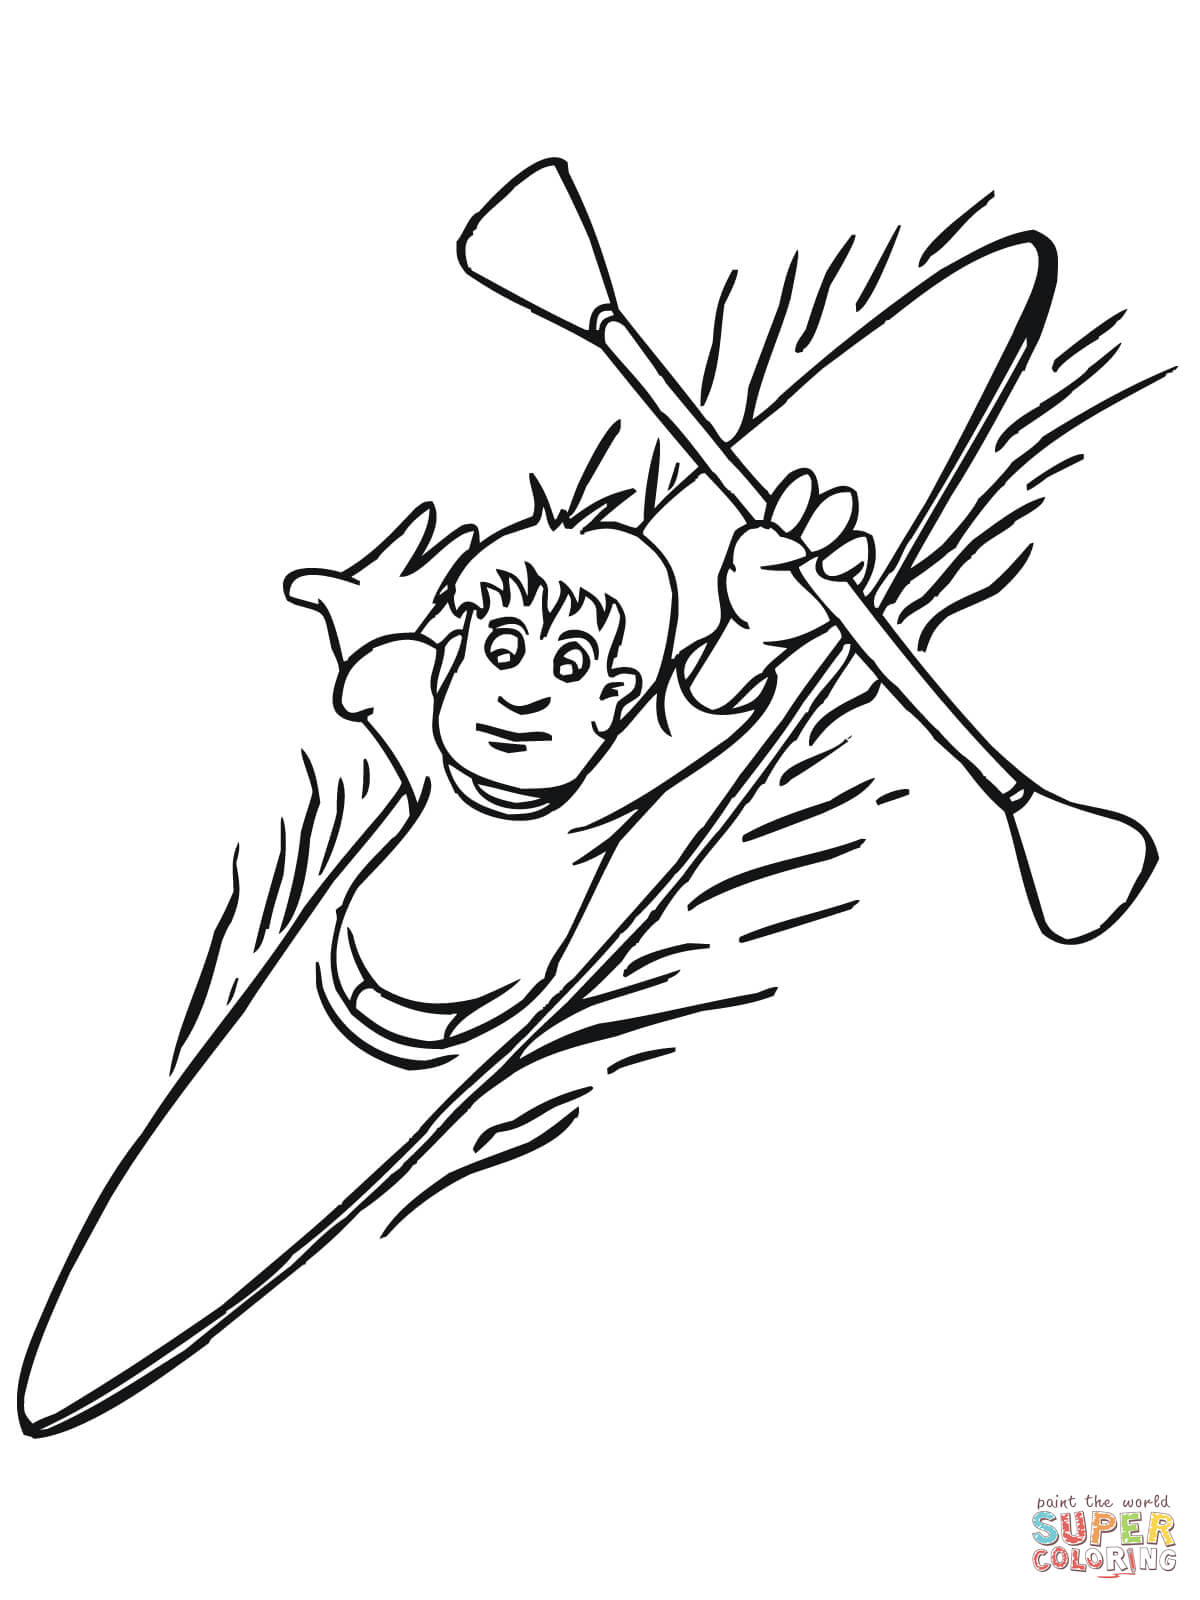 Boy Floating on Kayak coloring page | Free Printable Coloring Pages